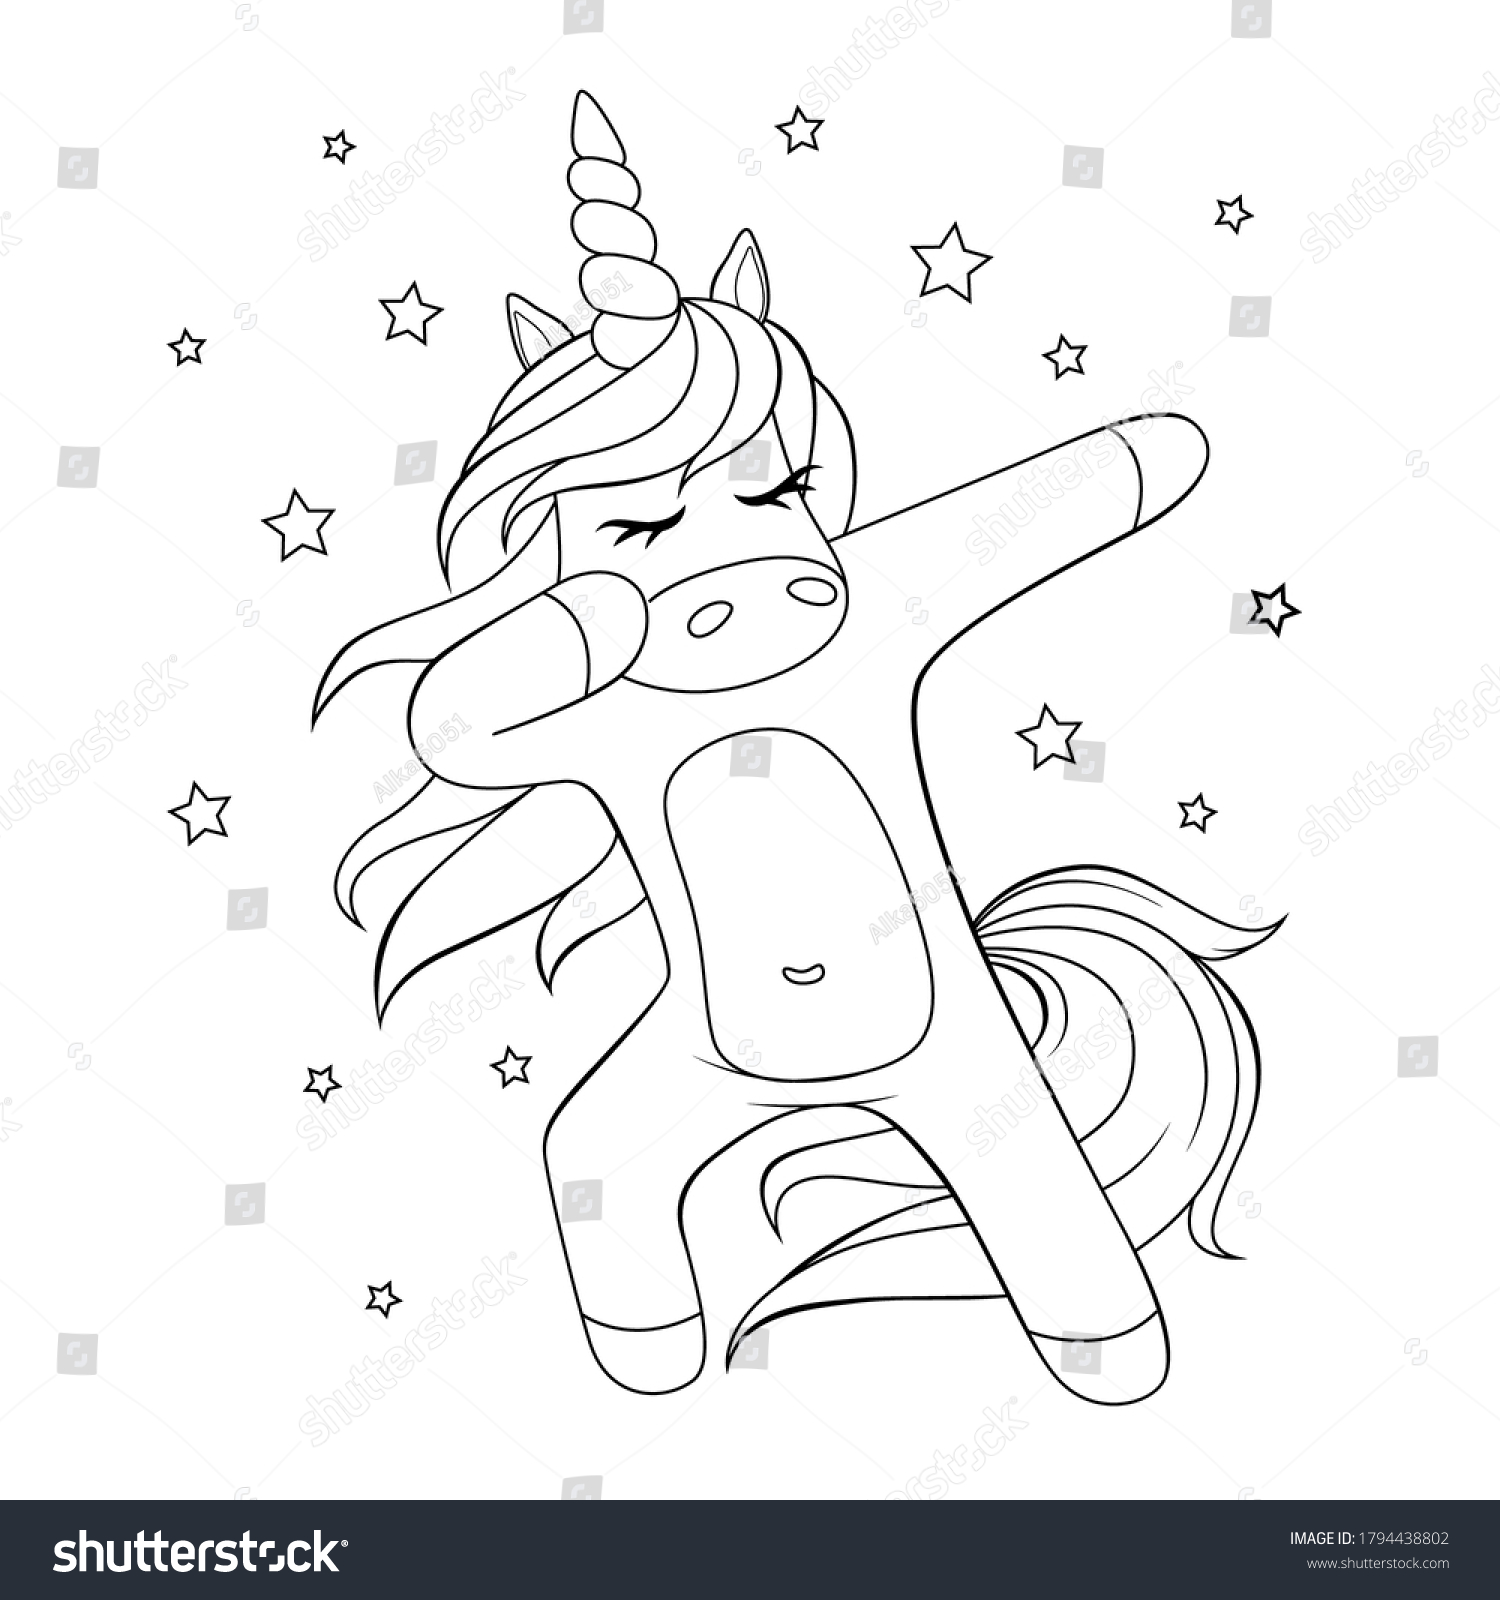 SVG of Cute dabbing unicorn. Black and white vector illustration for coloring book svg